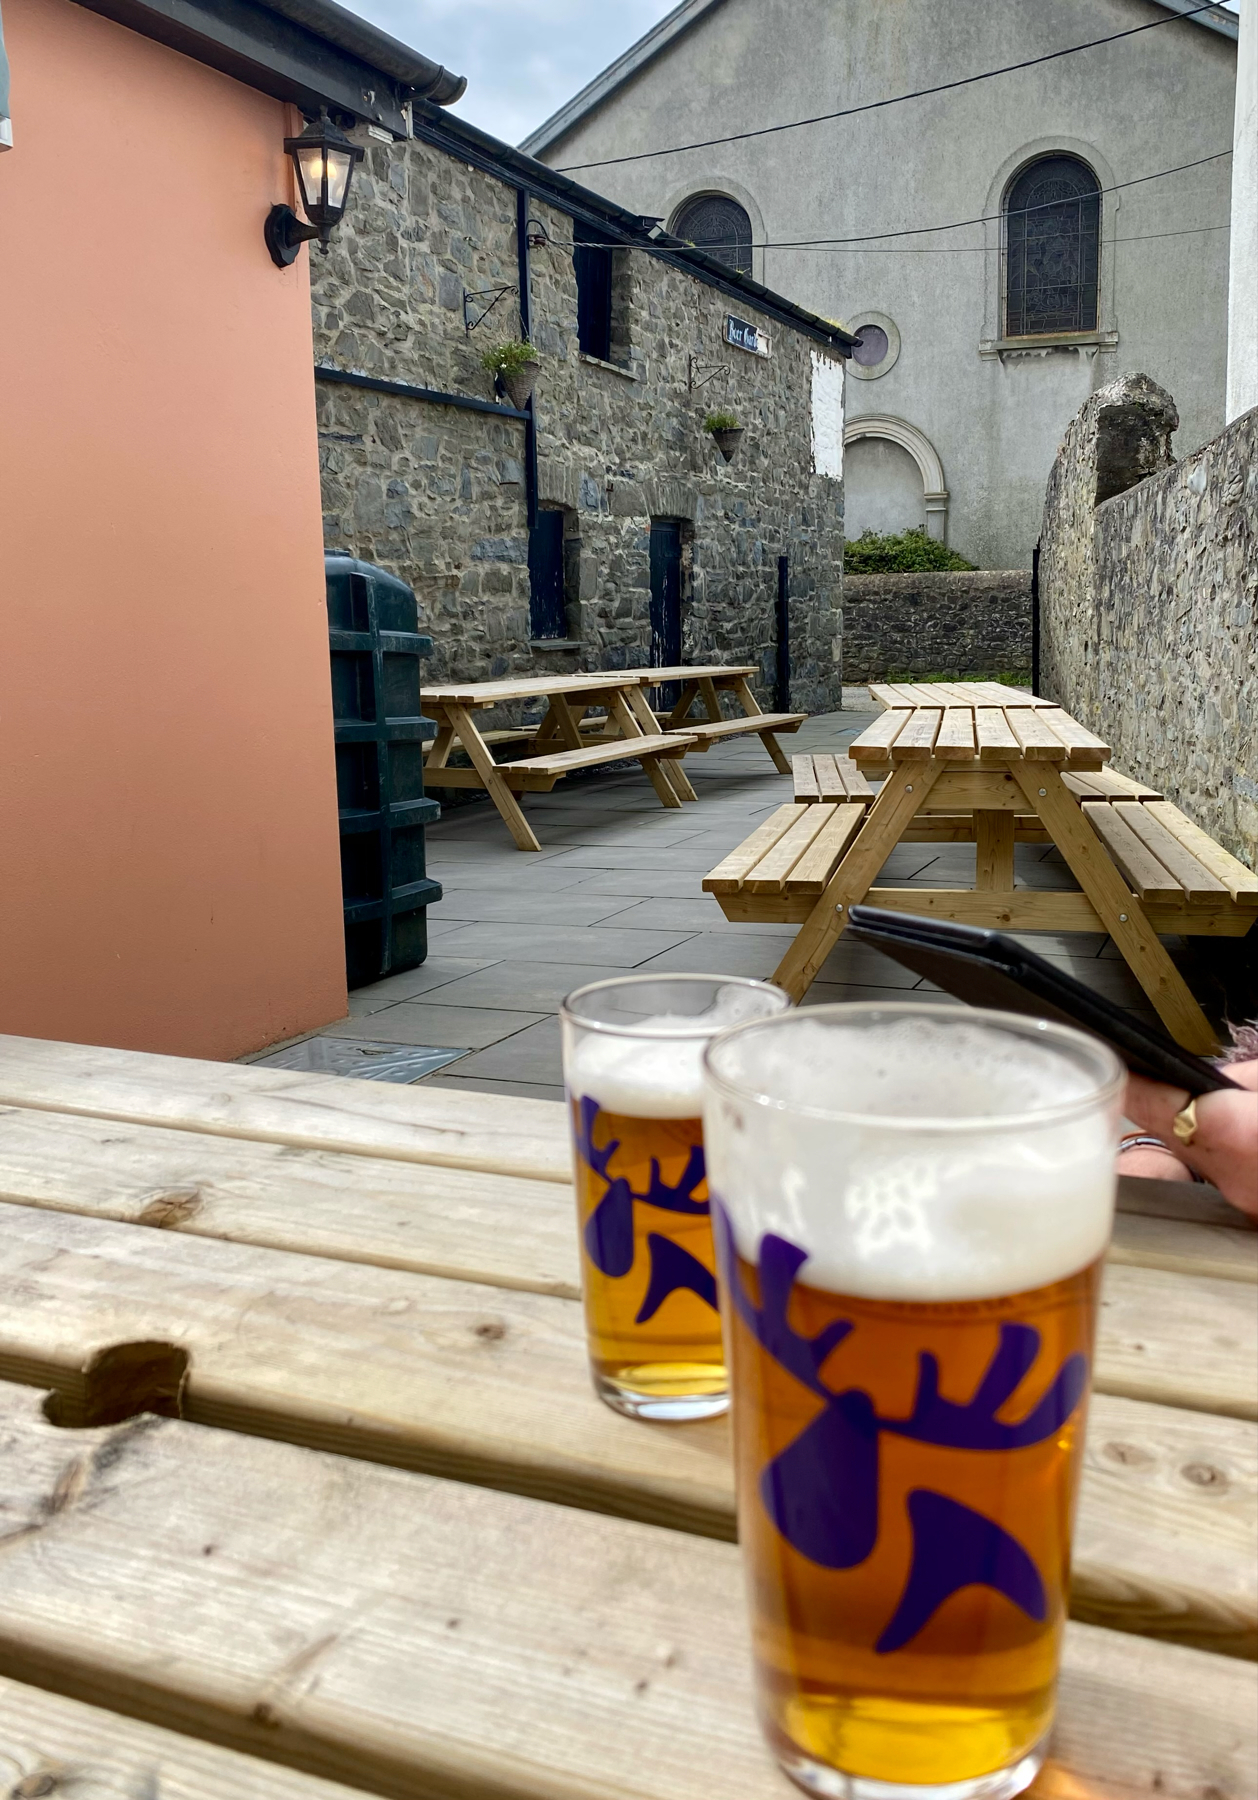 Two glasses of beer on a wooden table, with an outdoor seating area and stone buildings in the background.